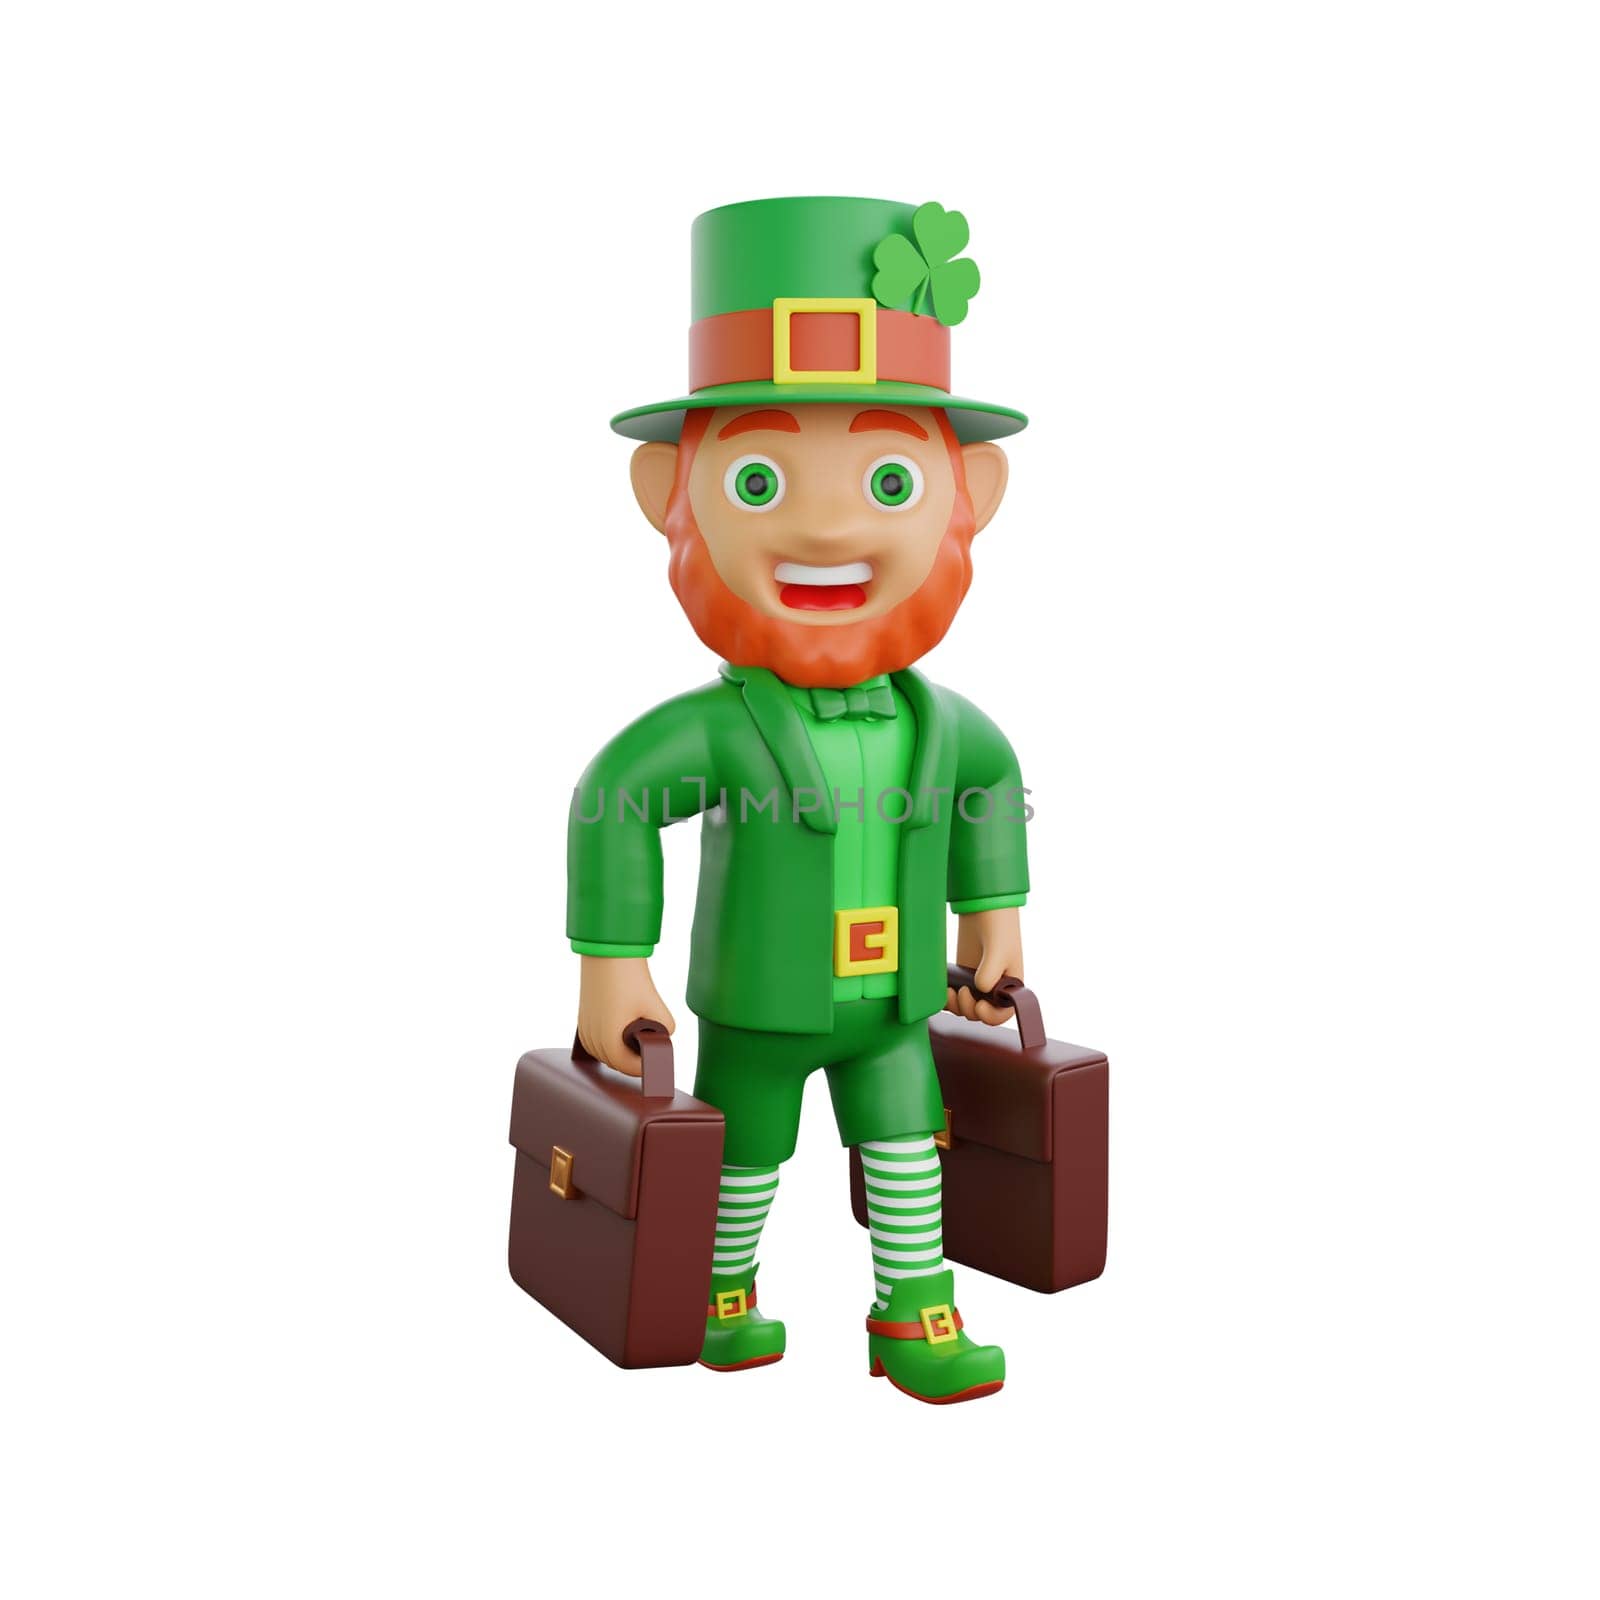 3D illustration of St. Patrick's Day character leprechaun holding two briefcases by Rahmat_Djayusman